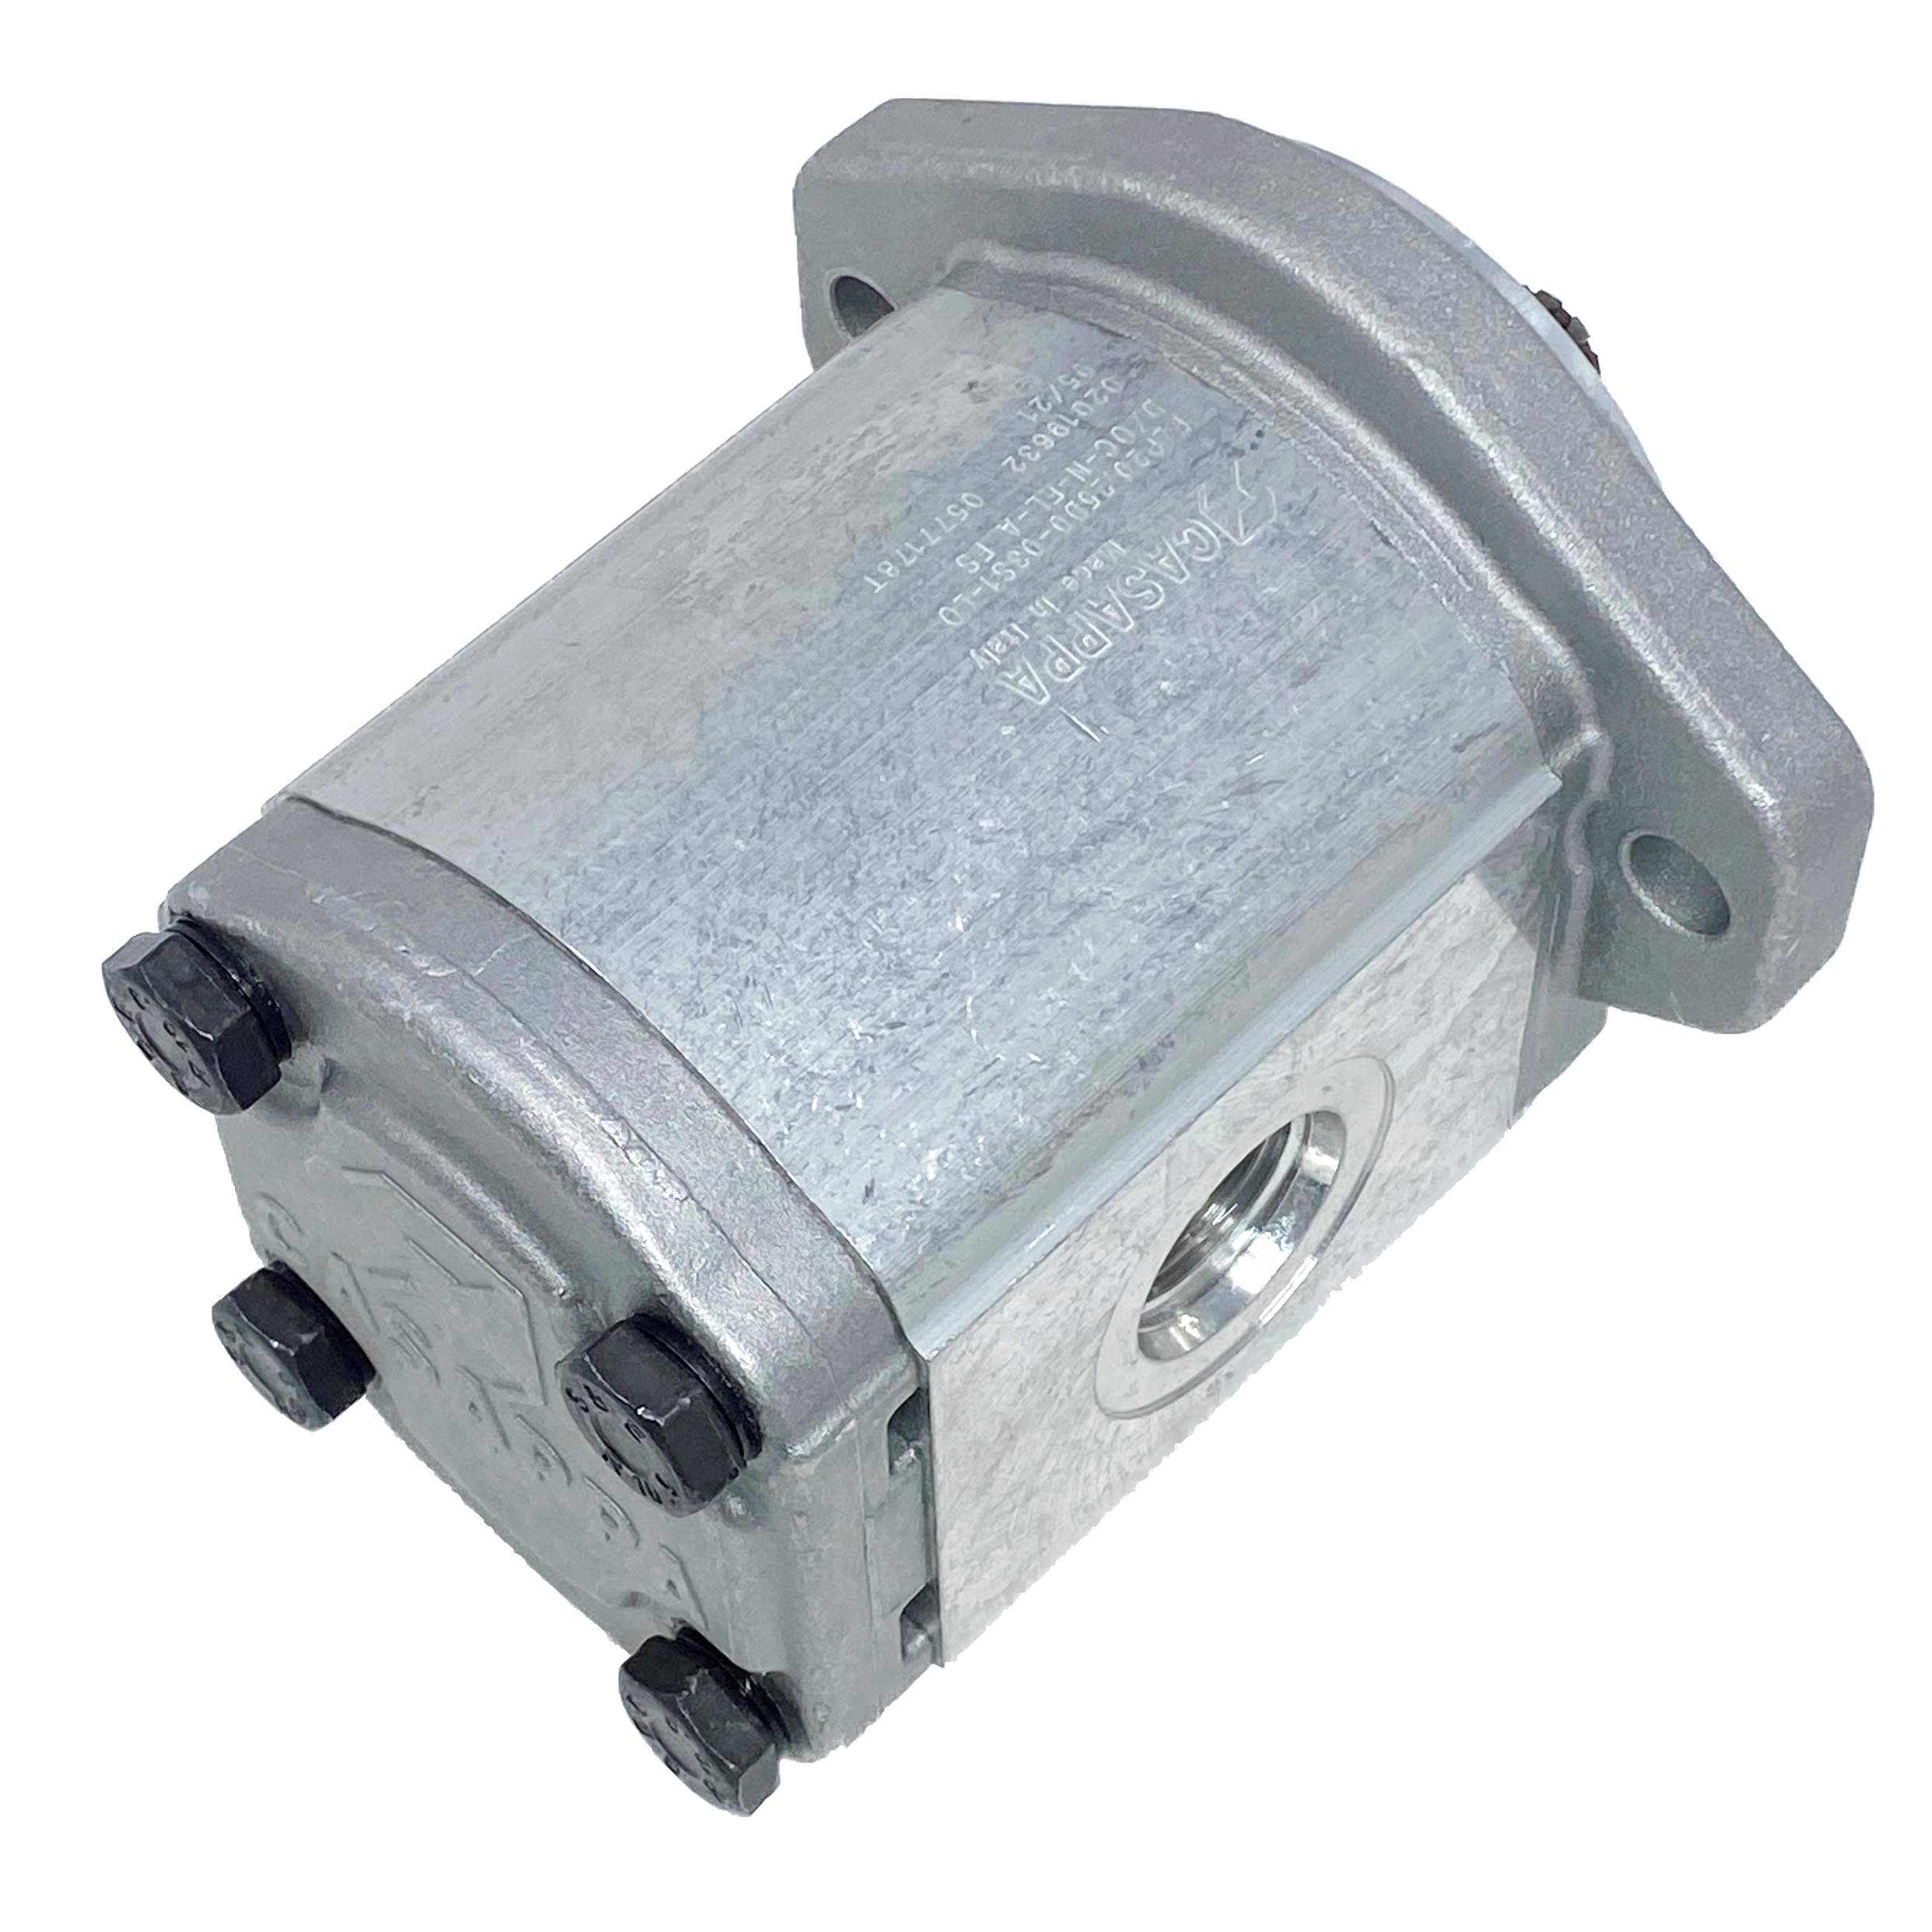 PHM20.31,5B0-03S9-LOC/OG-N-EL : Casappa Polaris Gear Motor, 33.03cc, 2900psi Rated, 2500RPM, Reversible Interior Drain, 9T 16/32dp Shaft, SAE A 2-Bolt Flange, 0.625 (5/8") #10 SAE Inlet, 1.25" #20 SAE Outlet, Cast Iron Body, Aluminum Flange